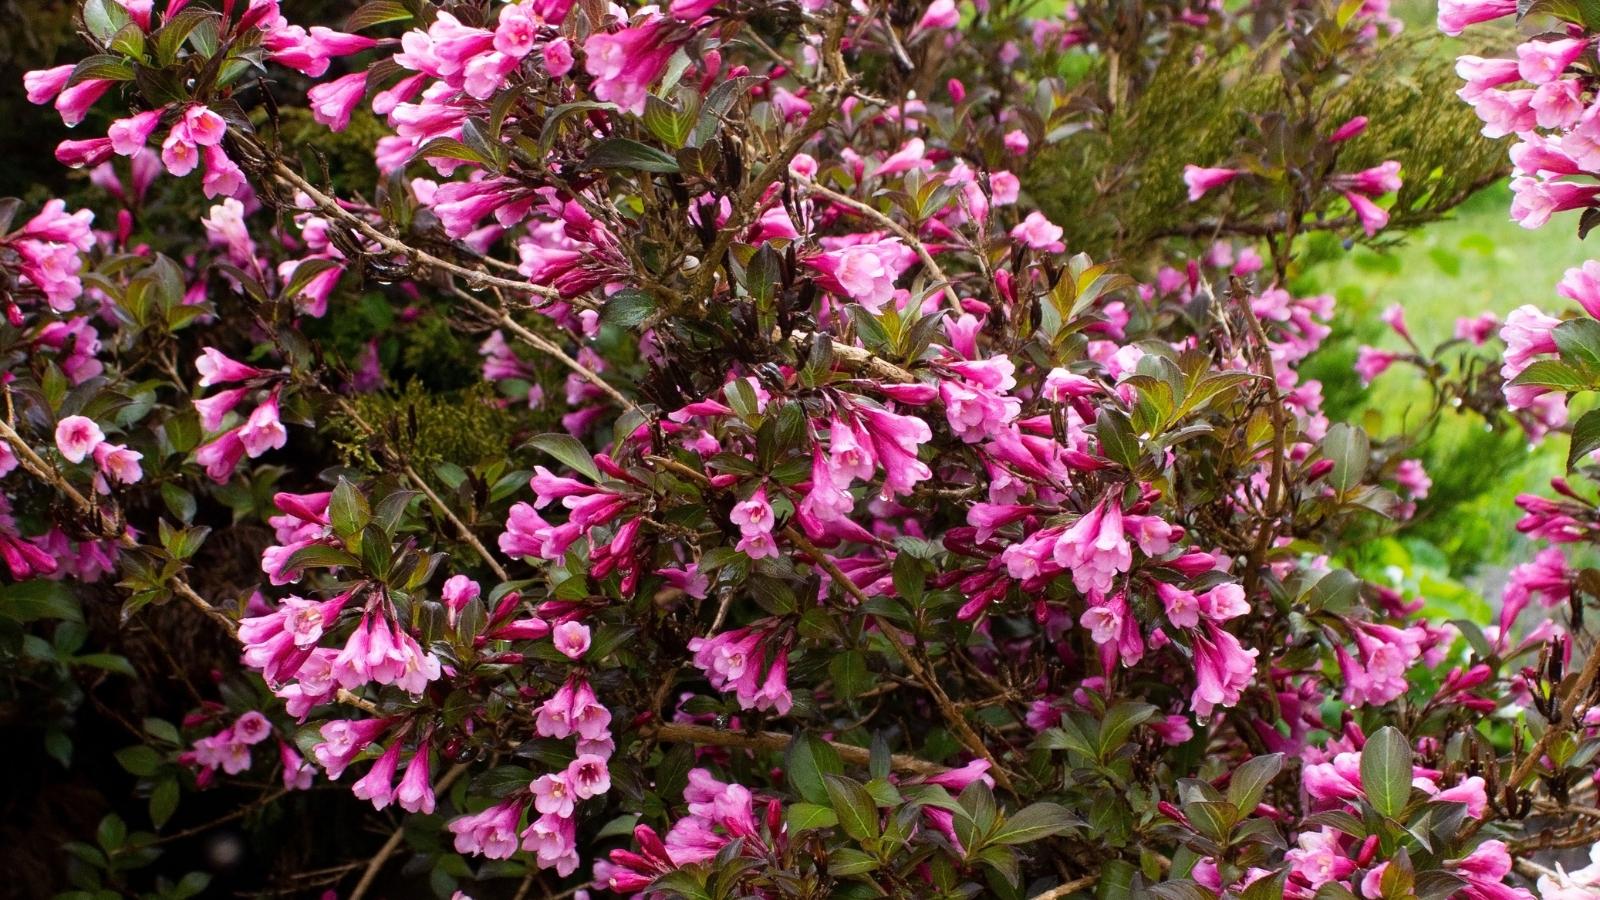 A lush 'Very Fine Wine' weigela shrub displays vibrant purple flowers, accentuated by a backdrop of lush green foliage with hints of earthy brown, creating a captivating garden centerpiece.